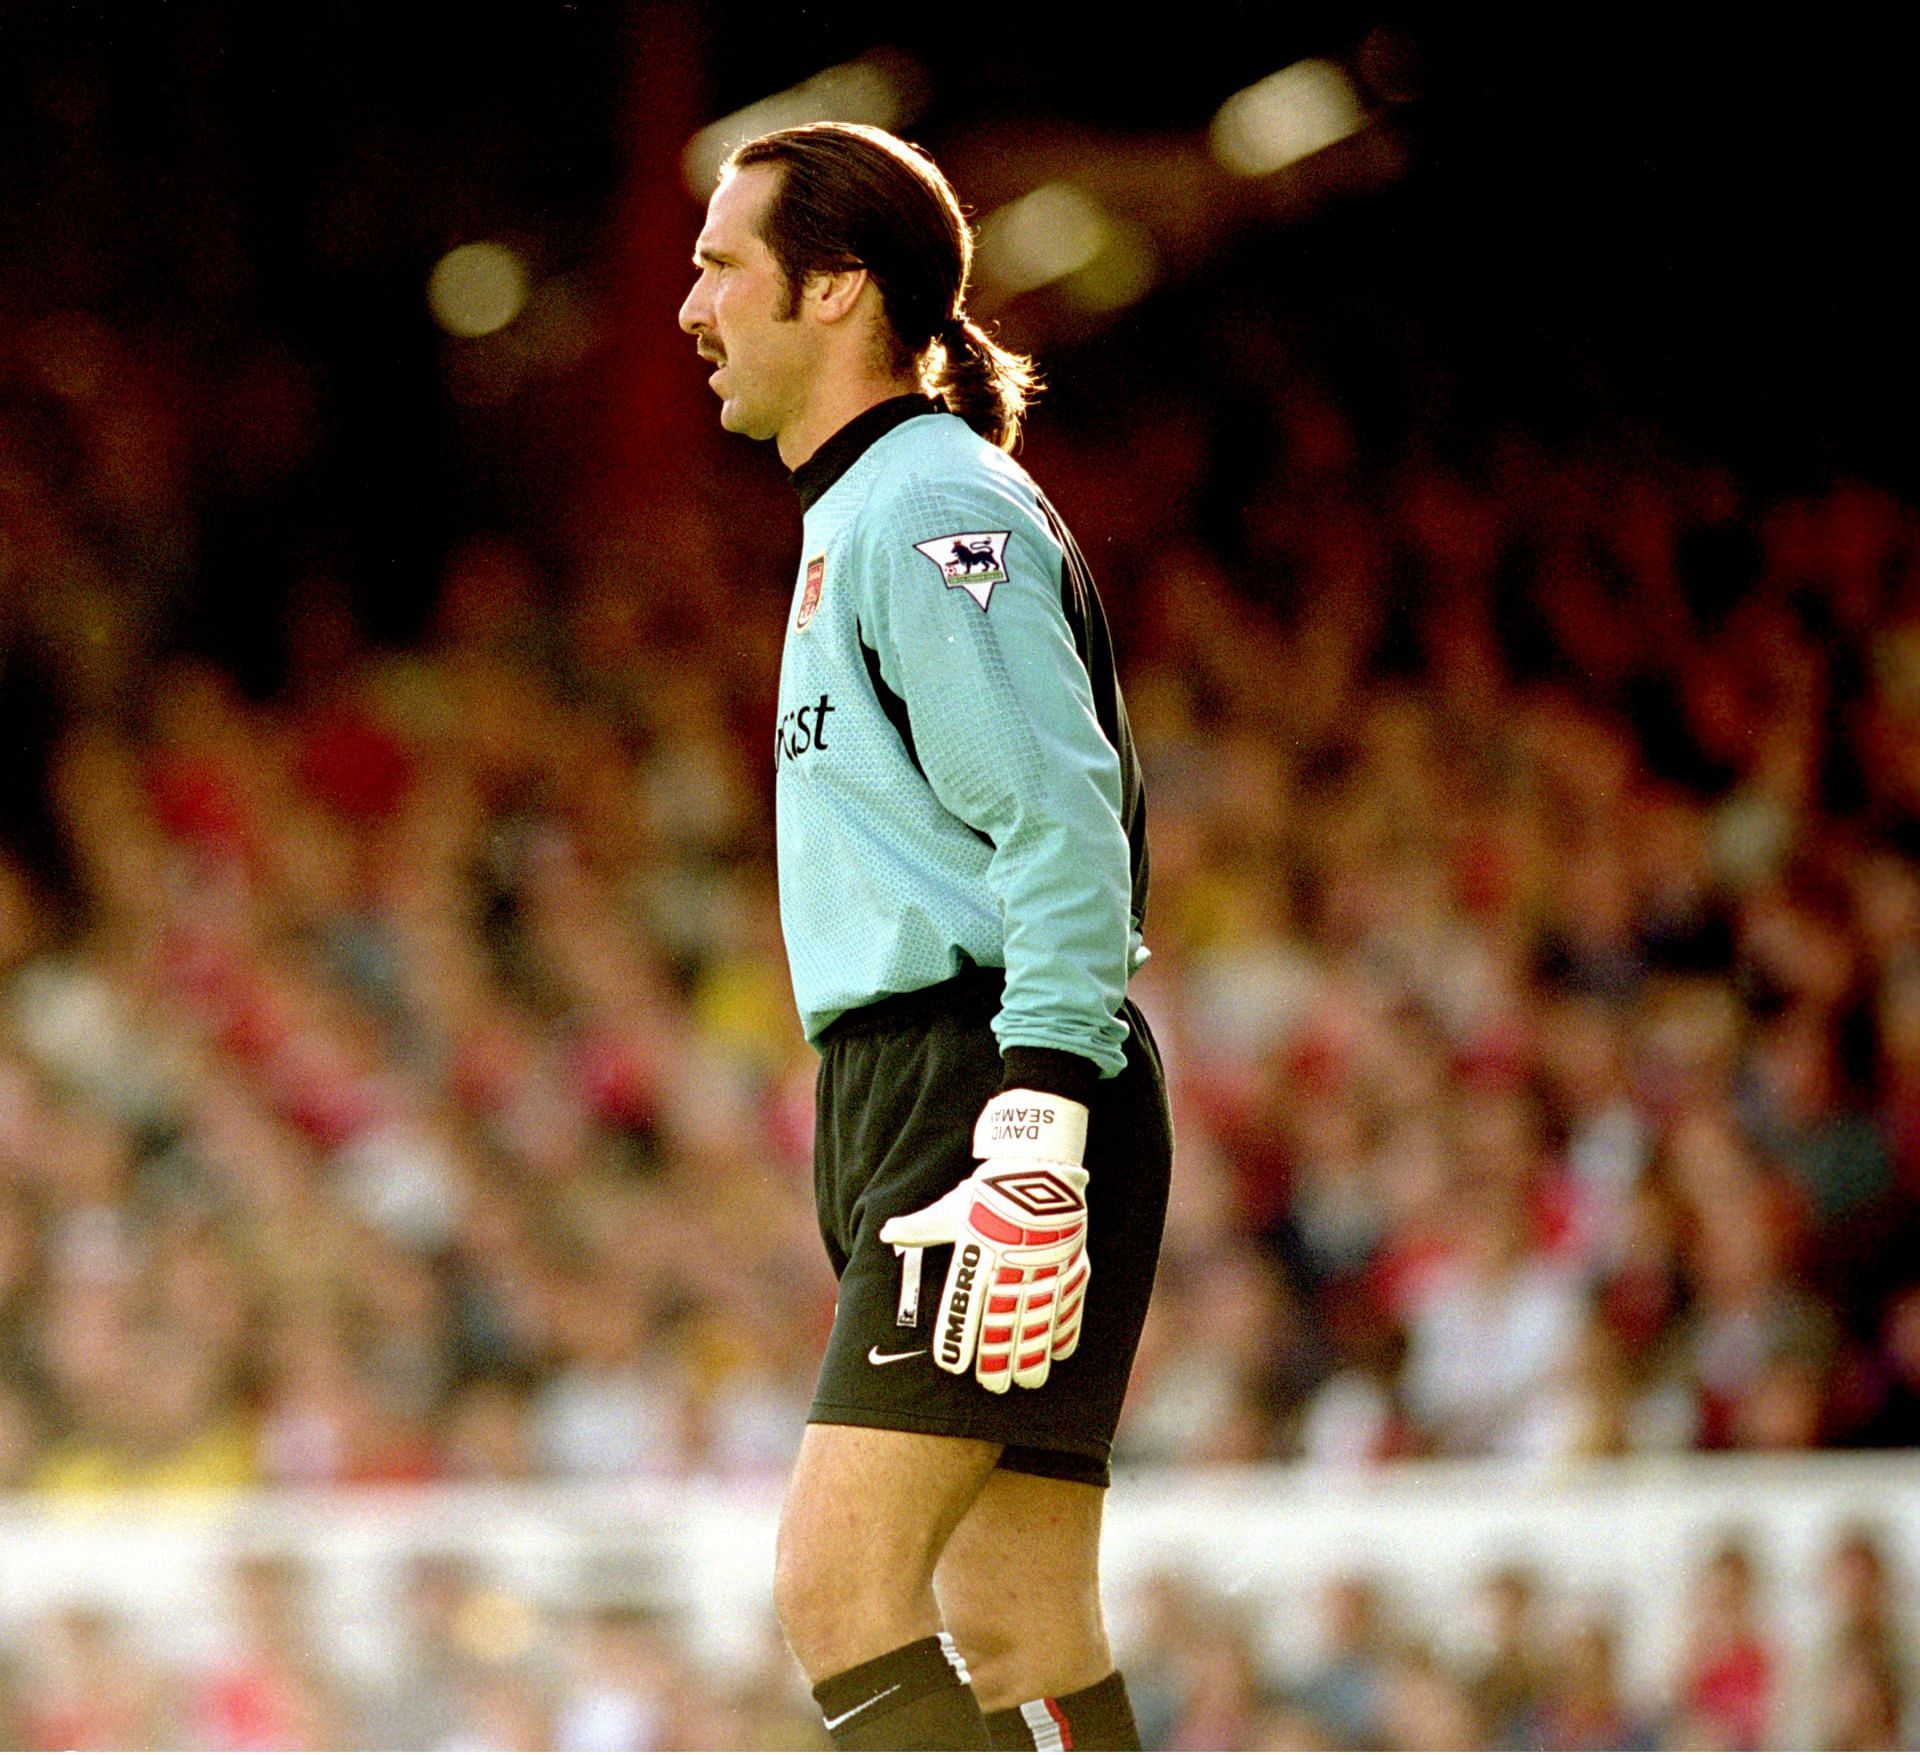 David Seaman was one of the best goalkeepers at Arsenal